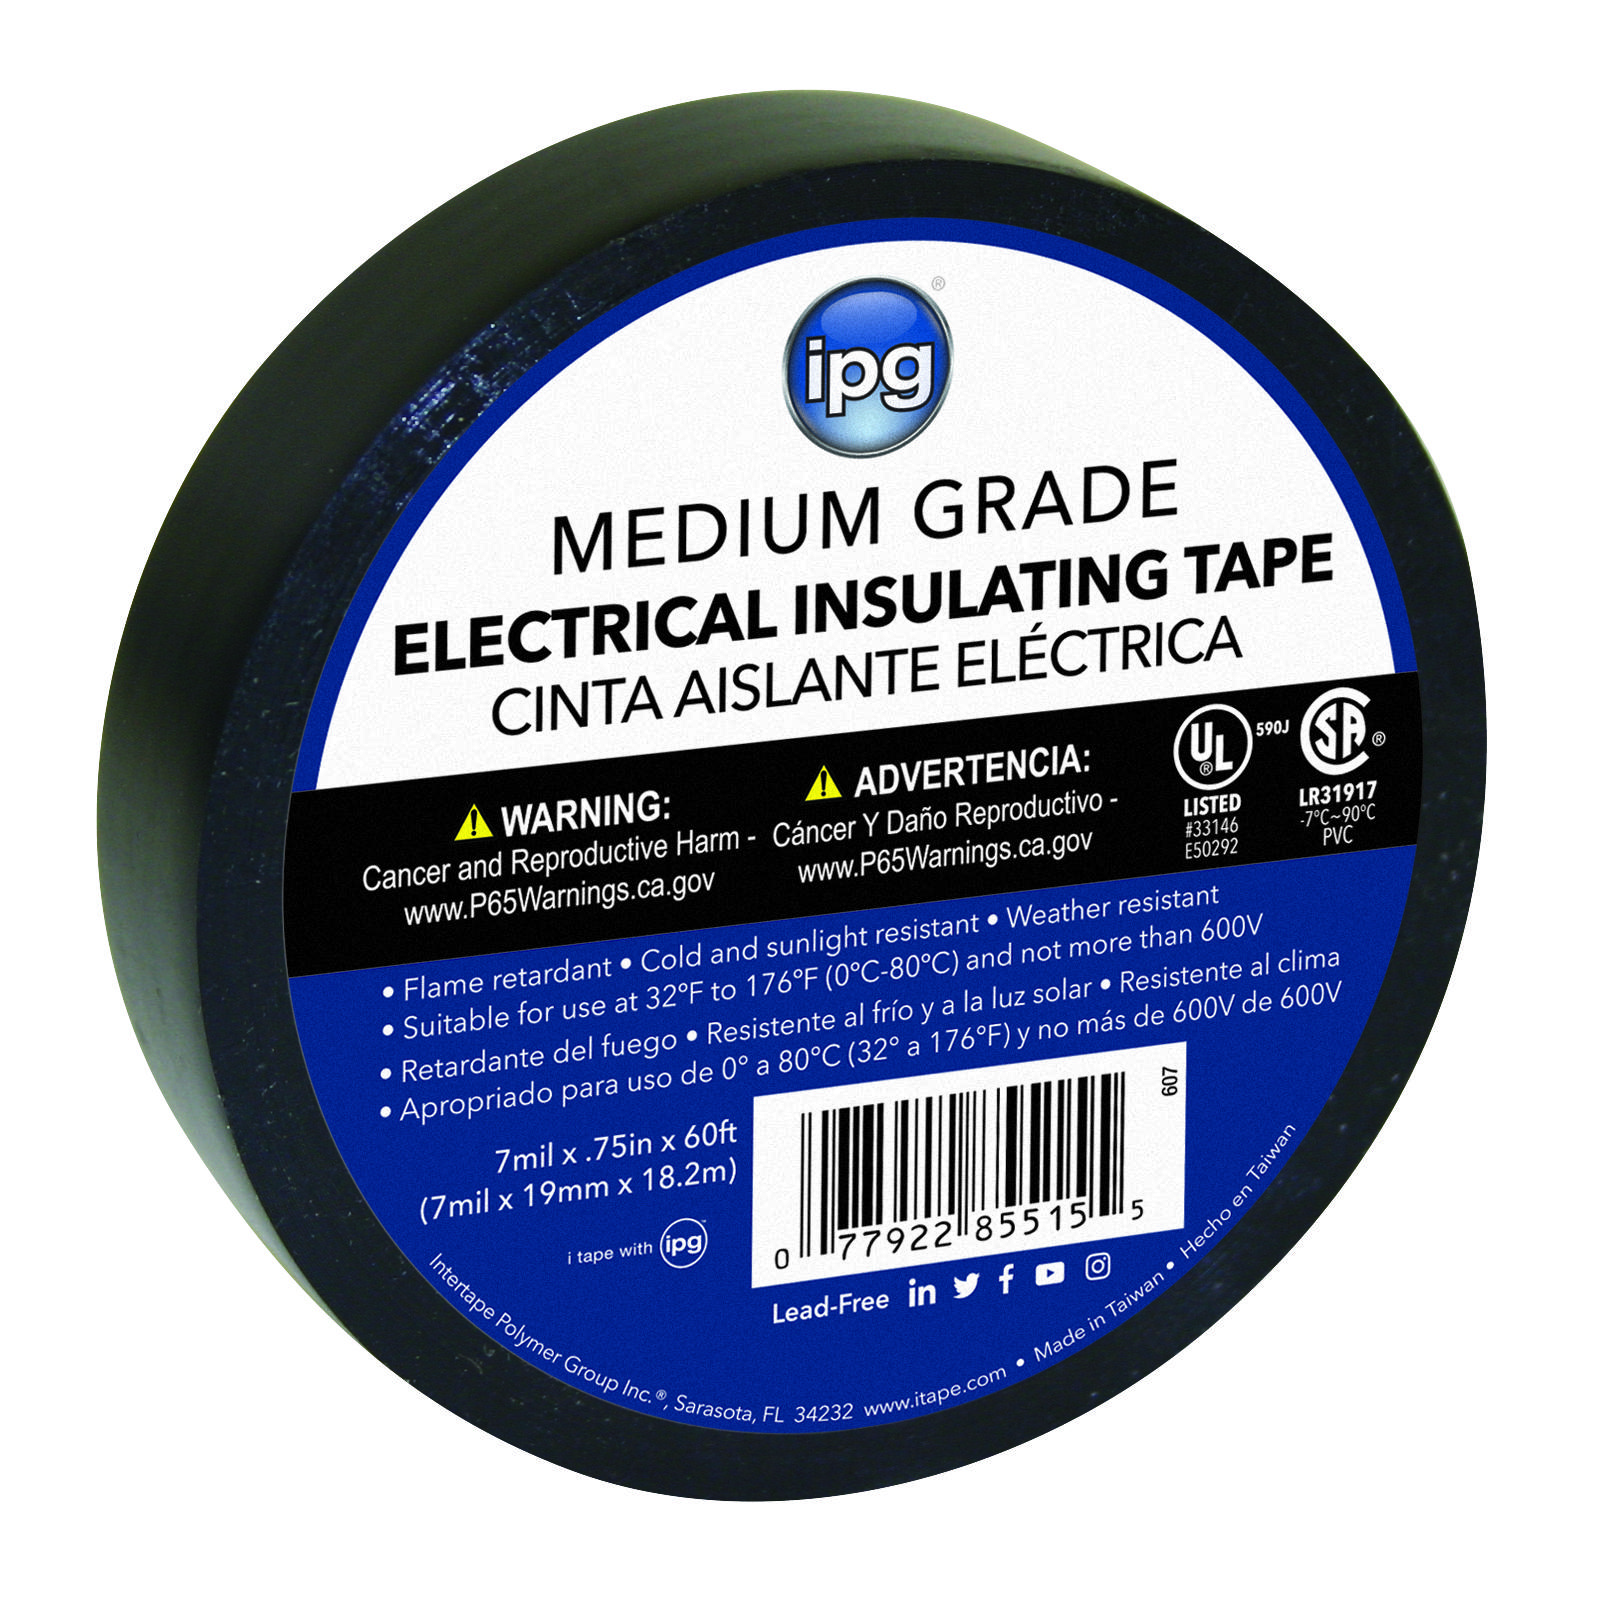 ipg® 602 Economy-Grade General Purpose Electrical Tape, 60 ft L x 3/4 in W, 7 mil THK, Rubber Adhesive, PVC Film Backing, Black